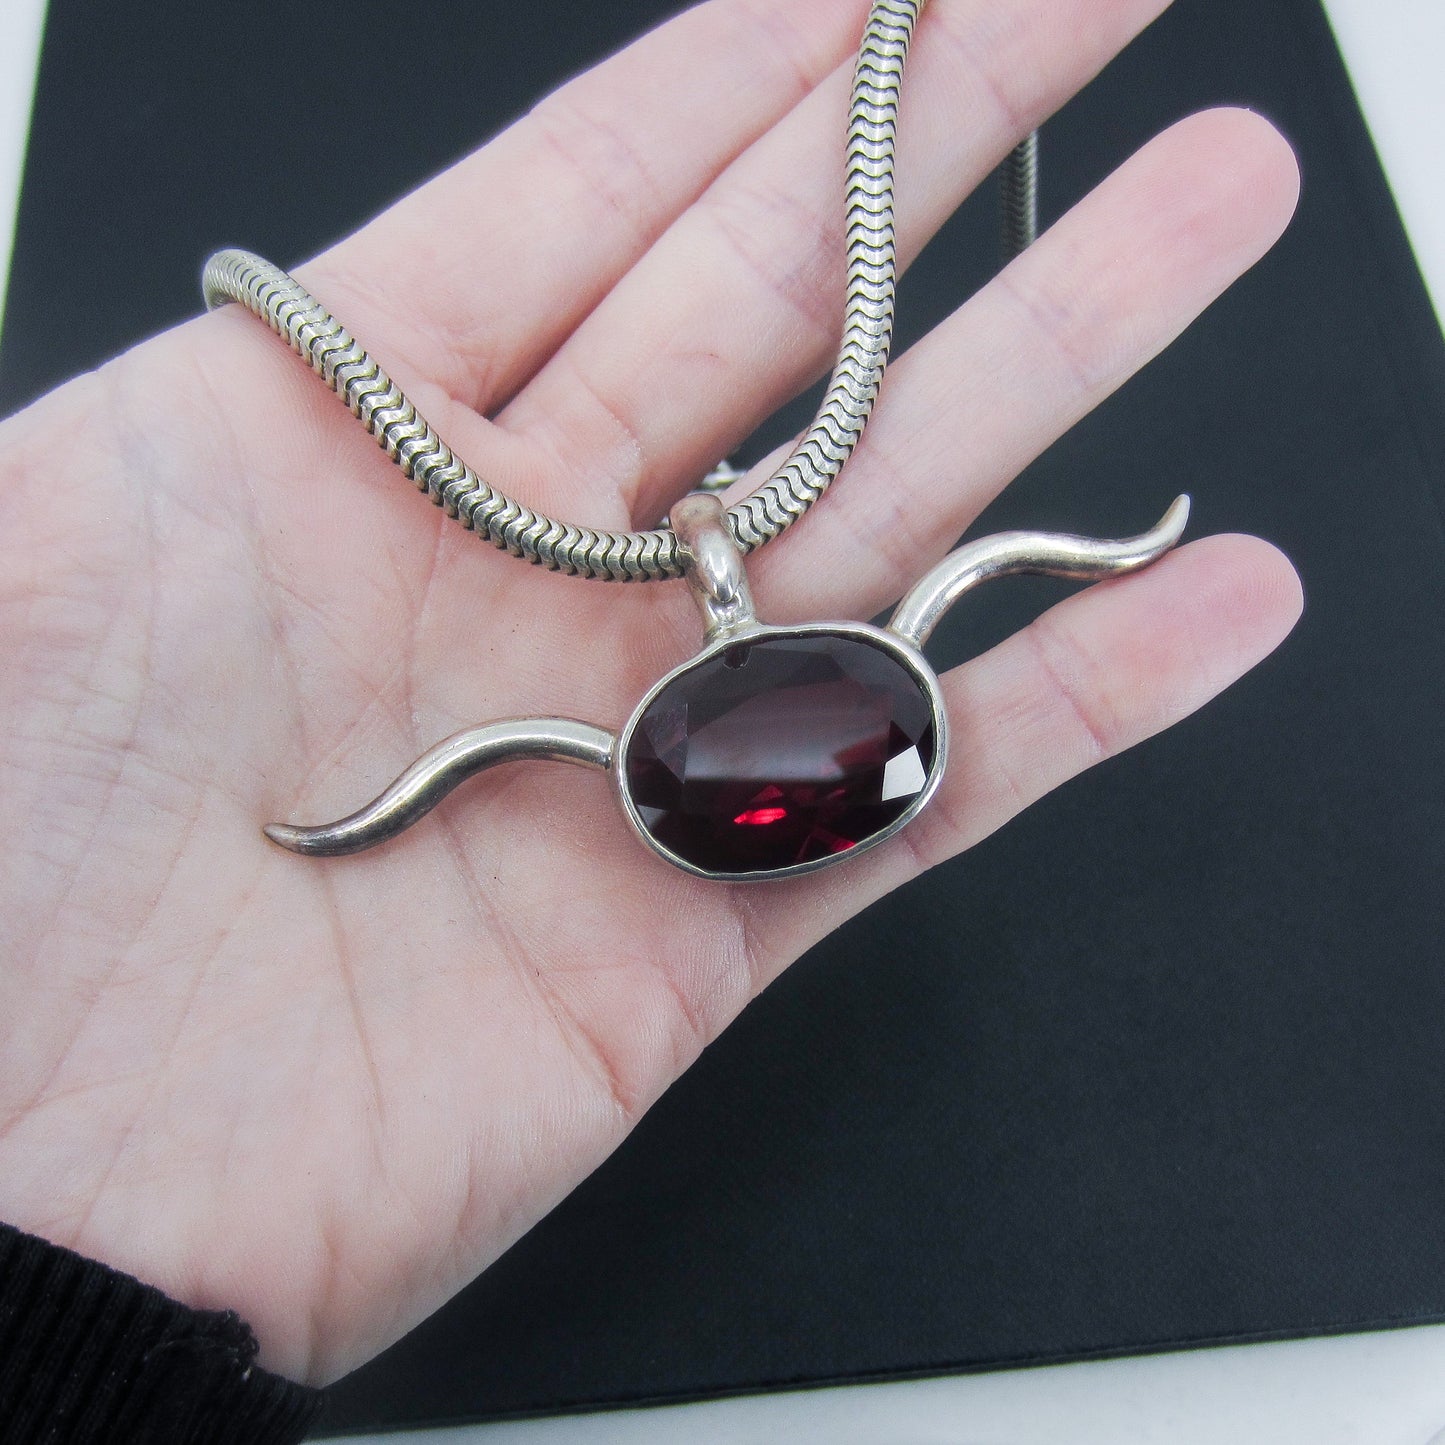 Post-Modern Synthetic Ruby Horn Necklace Sterling, Michael Spirito c. 2000's